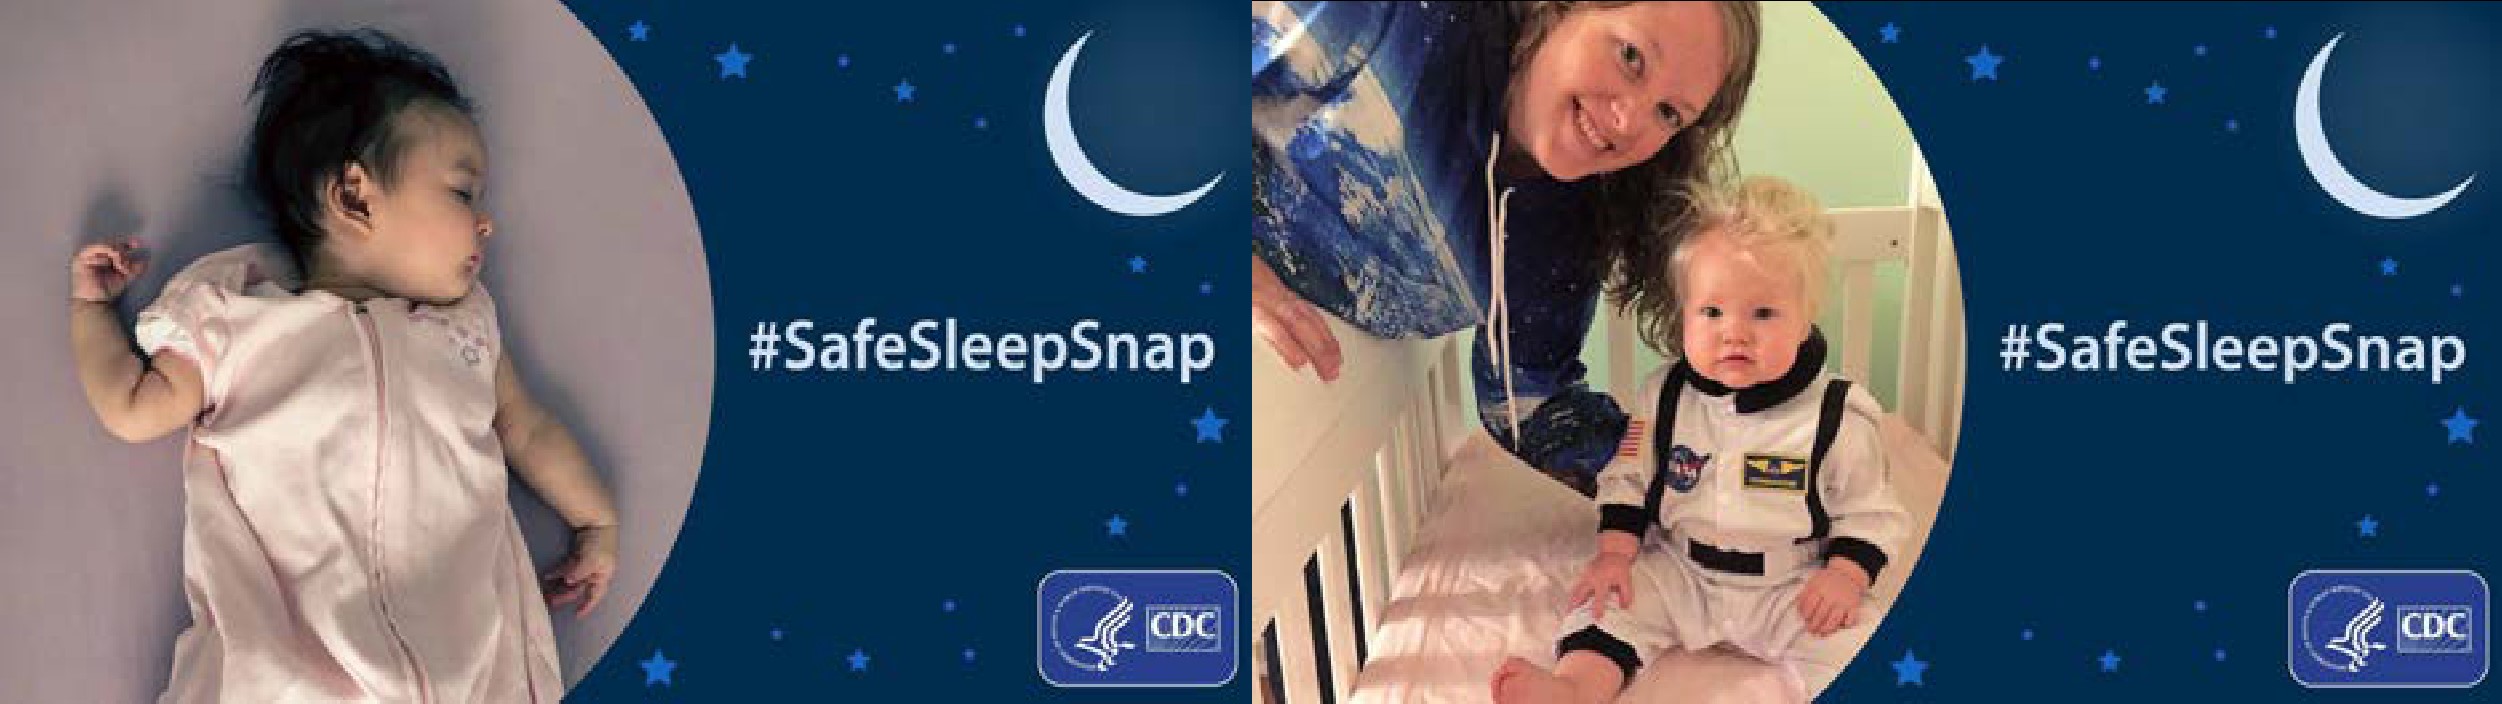 Image 1: Baby Sleeping on her back, next to an illustration of a moon and stars, with the words #SafeSleepSnap, and the CDC logo Image 2: A mother smiling with her baby son, who is sitting in his crib wearing an astronaut outfit, next to an illustration of a moon and stars, with the words #SafeSleepSnap, and the CDC logo.